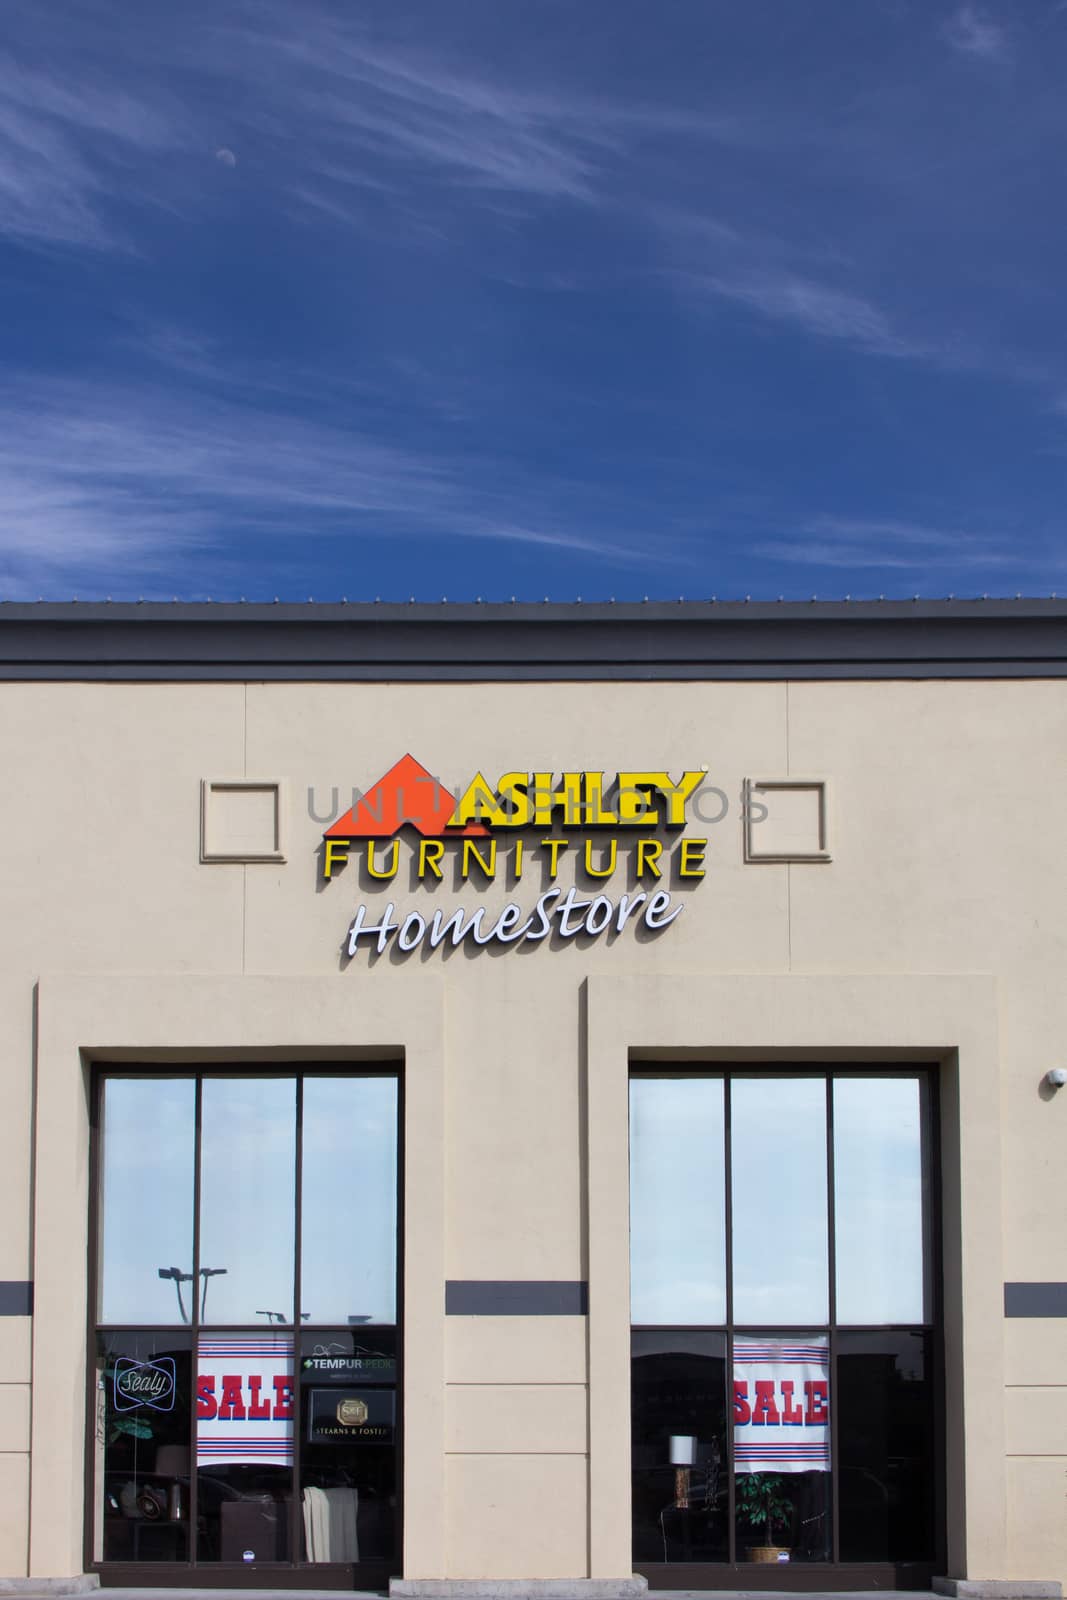 Ashley Furniture store exterior by wolterk